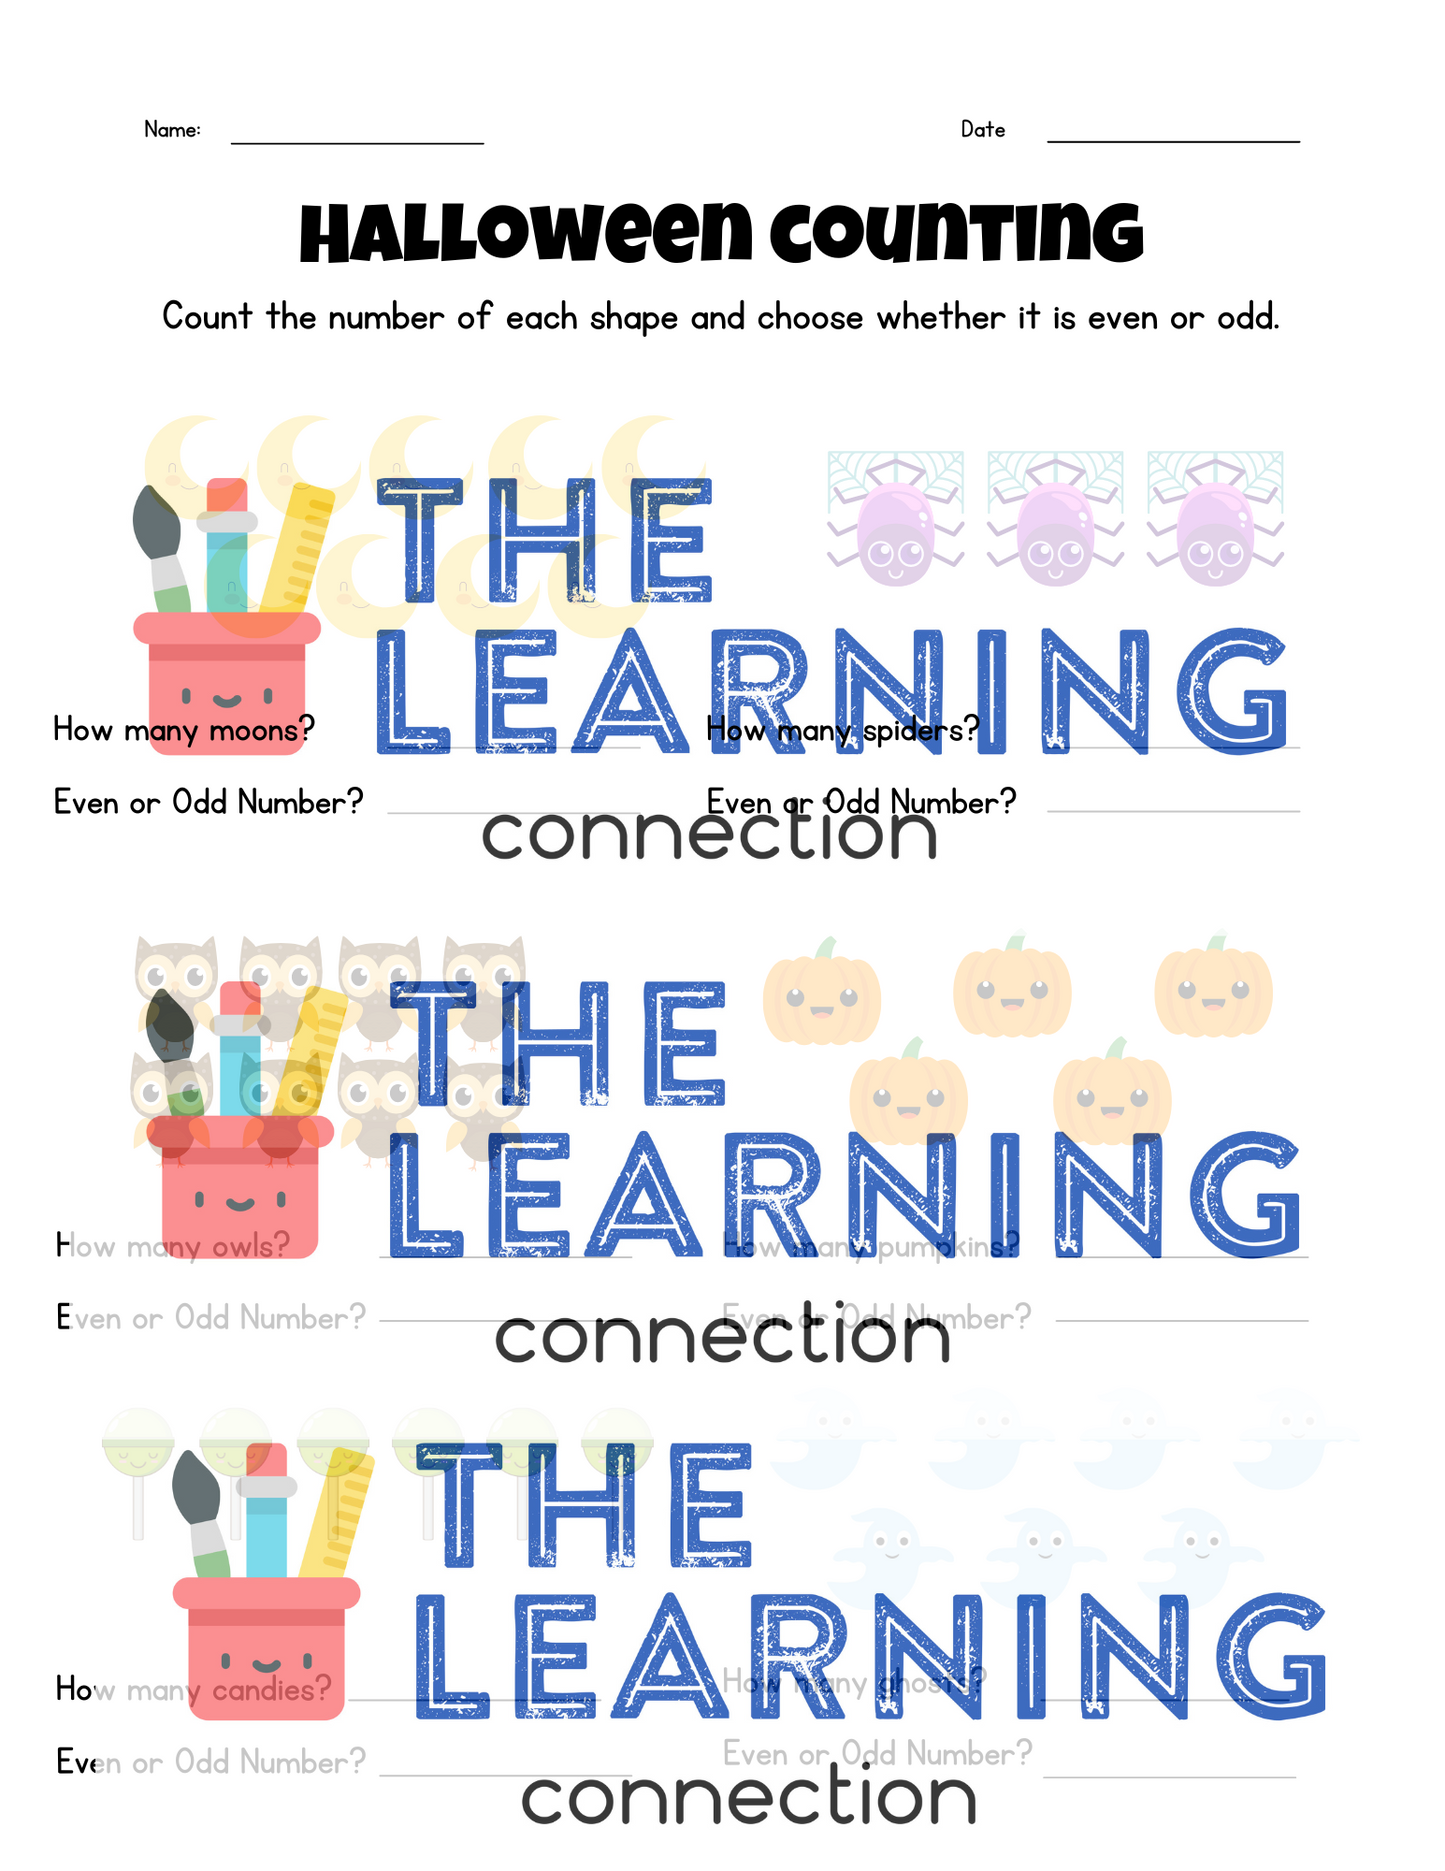 Halloween Counting Even or Odd